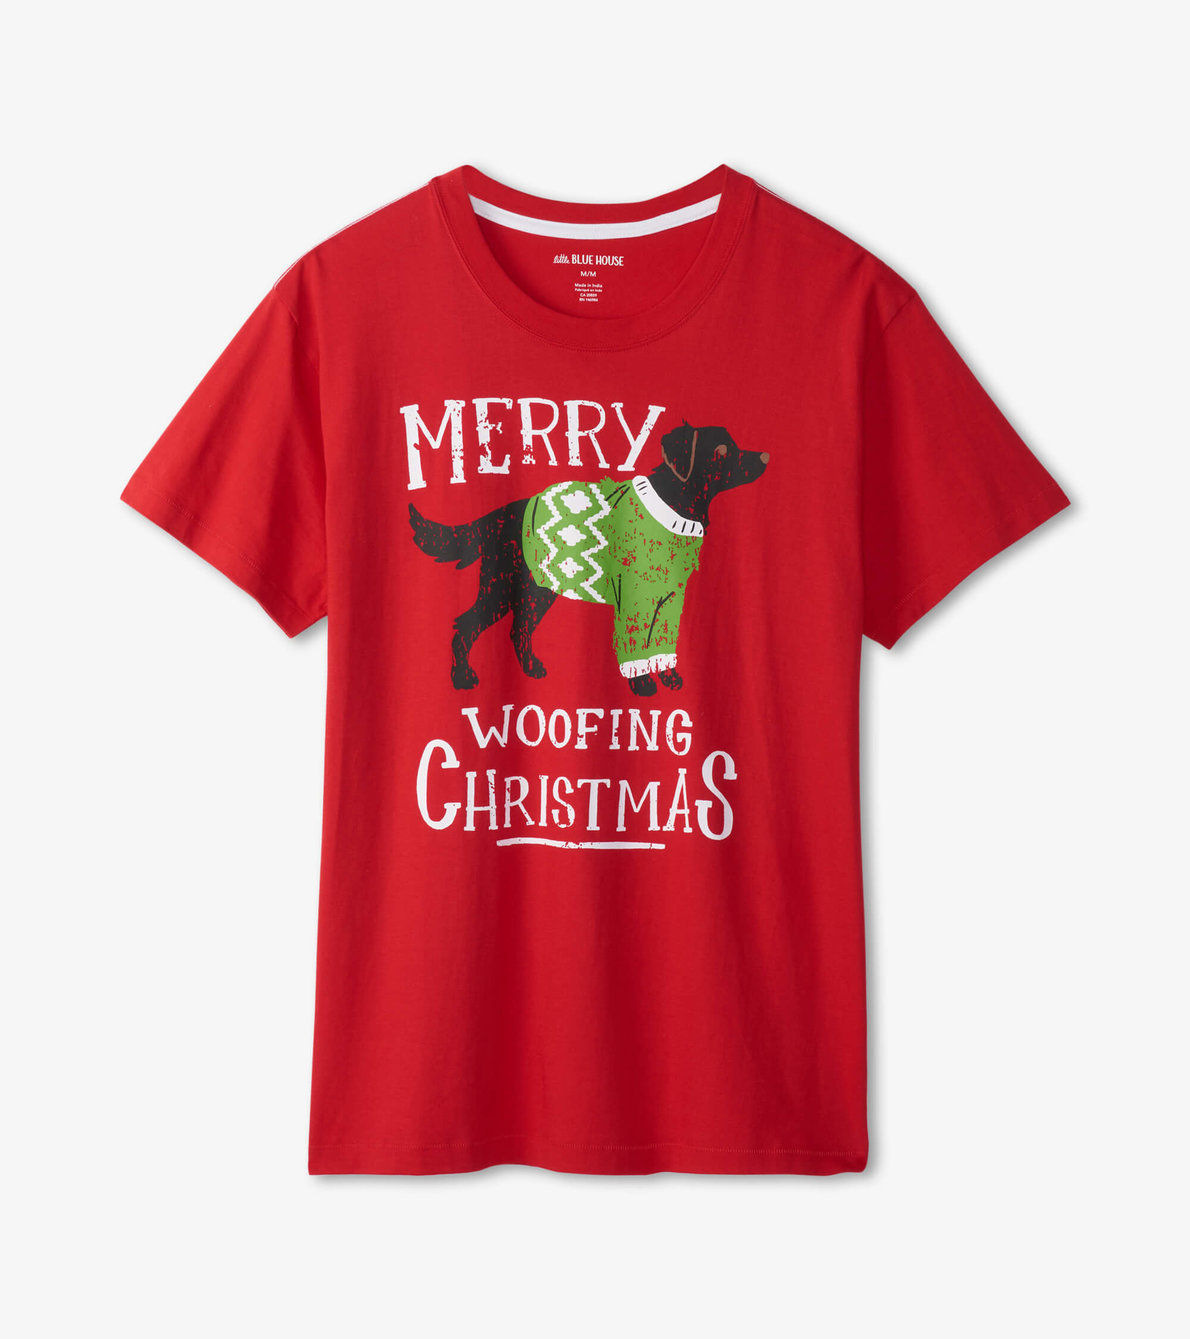 View larger image of Woofing Christmas Men's Tee